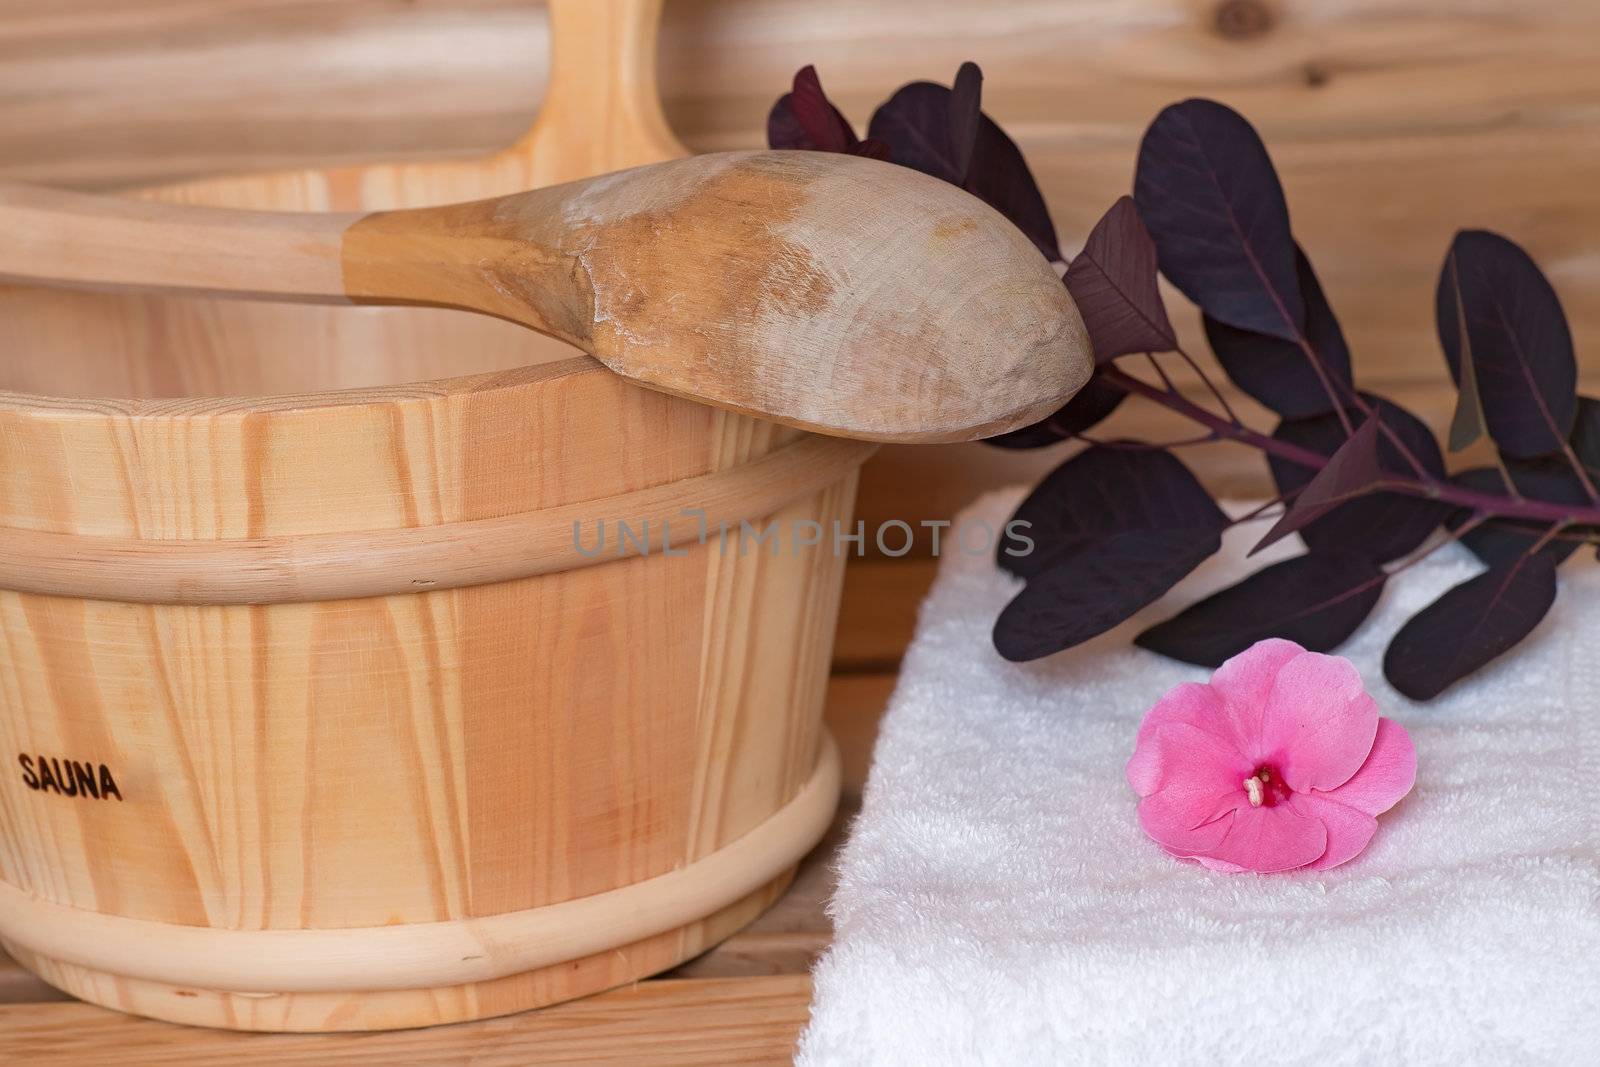 bucket with ladle across it next to towel with flowers inside a sauna